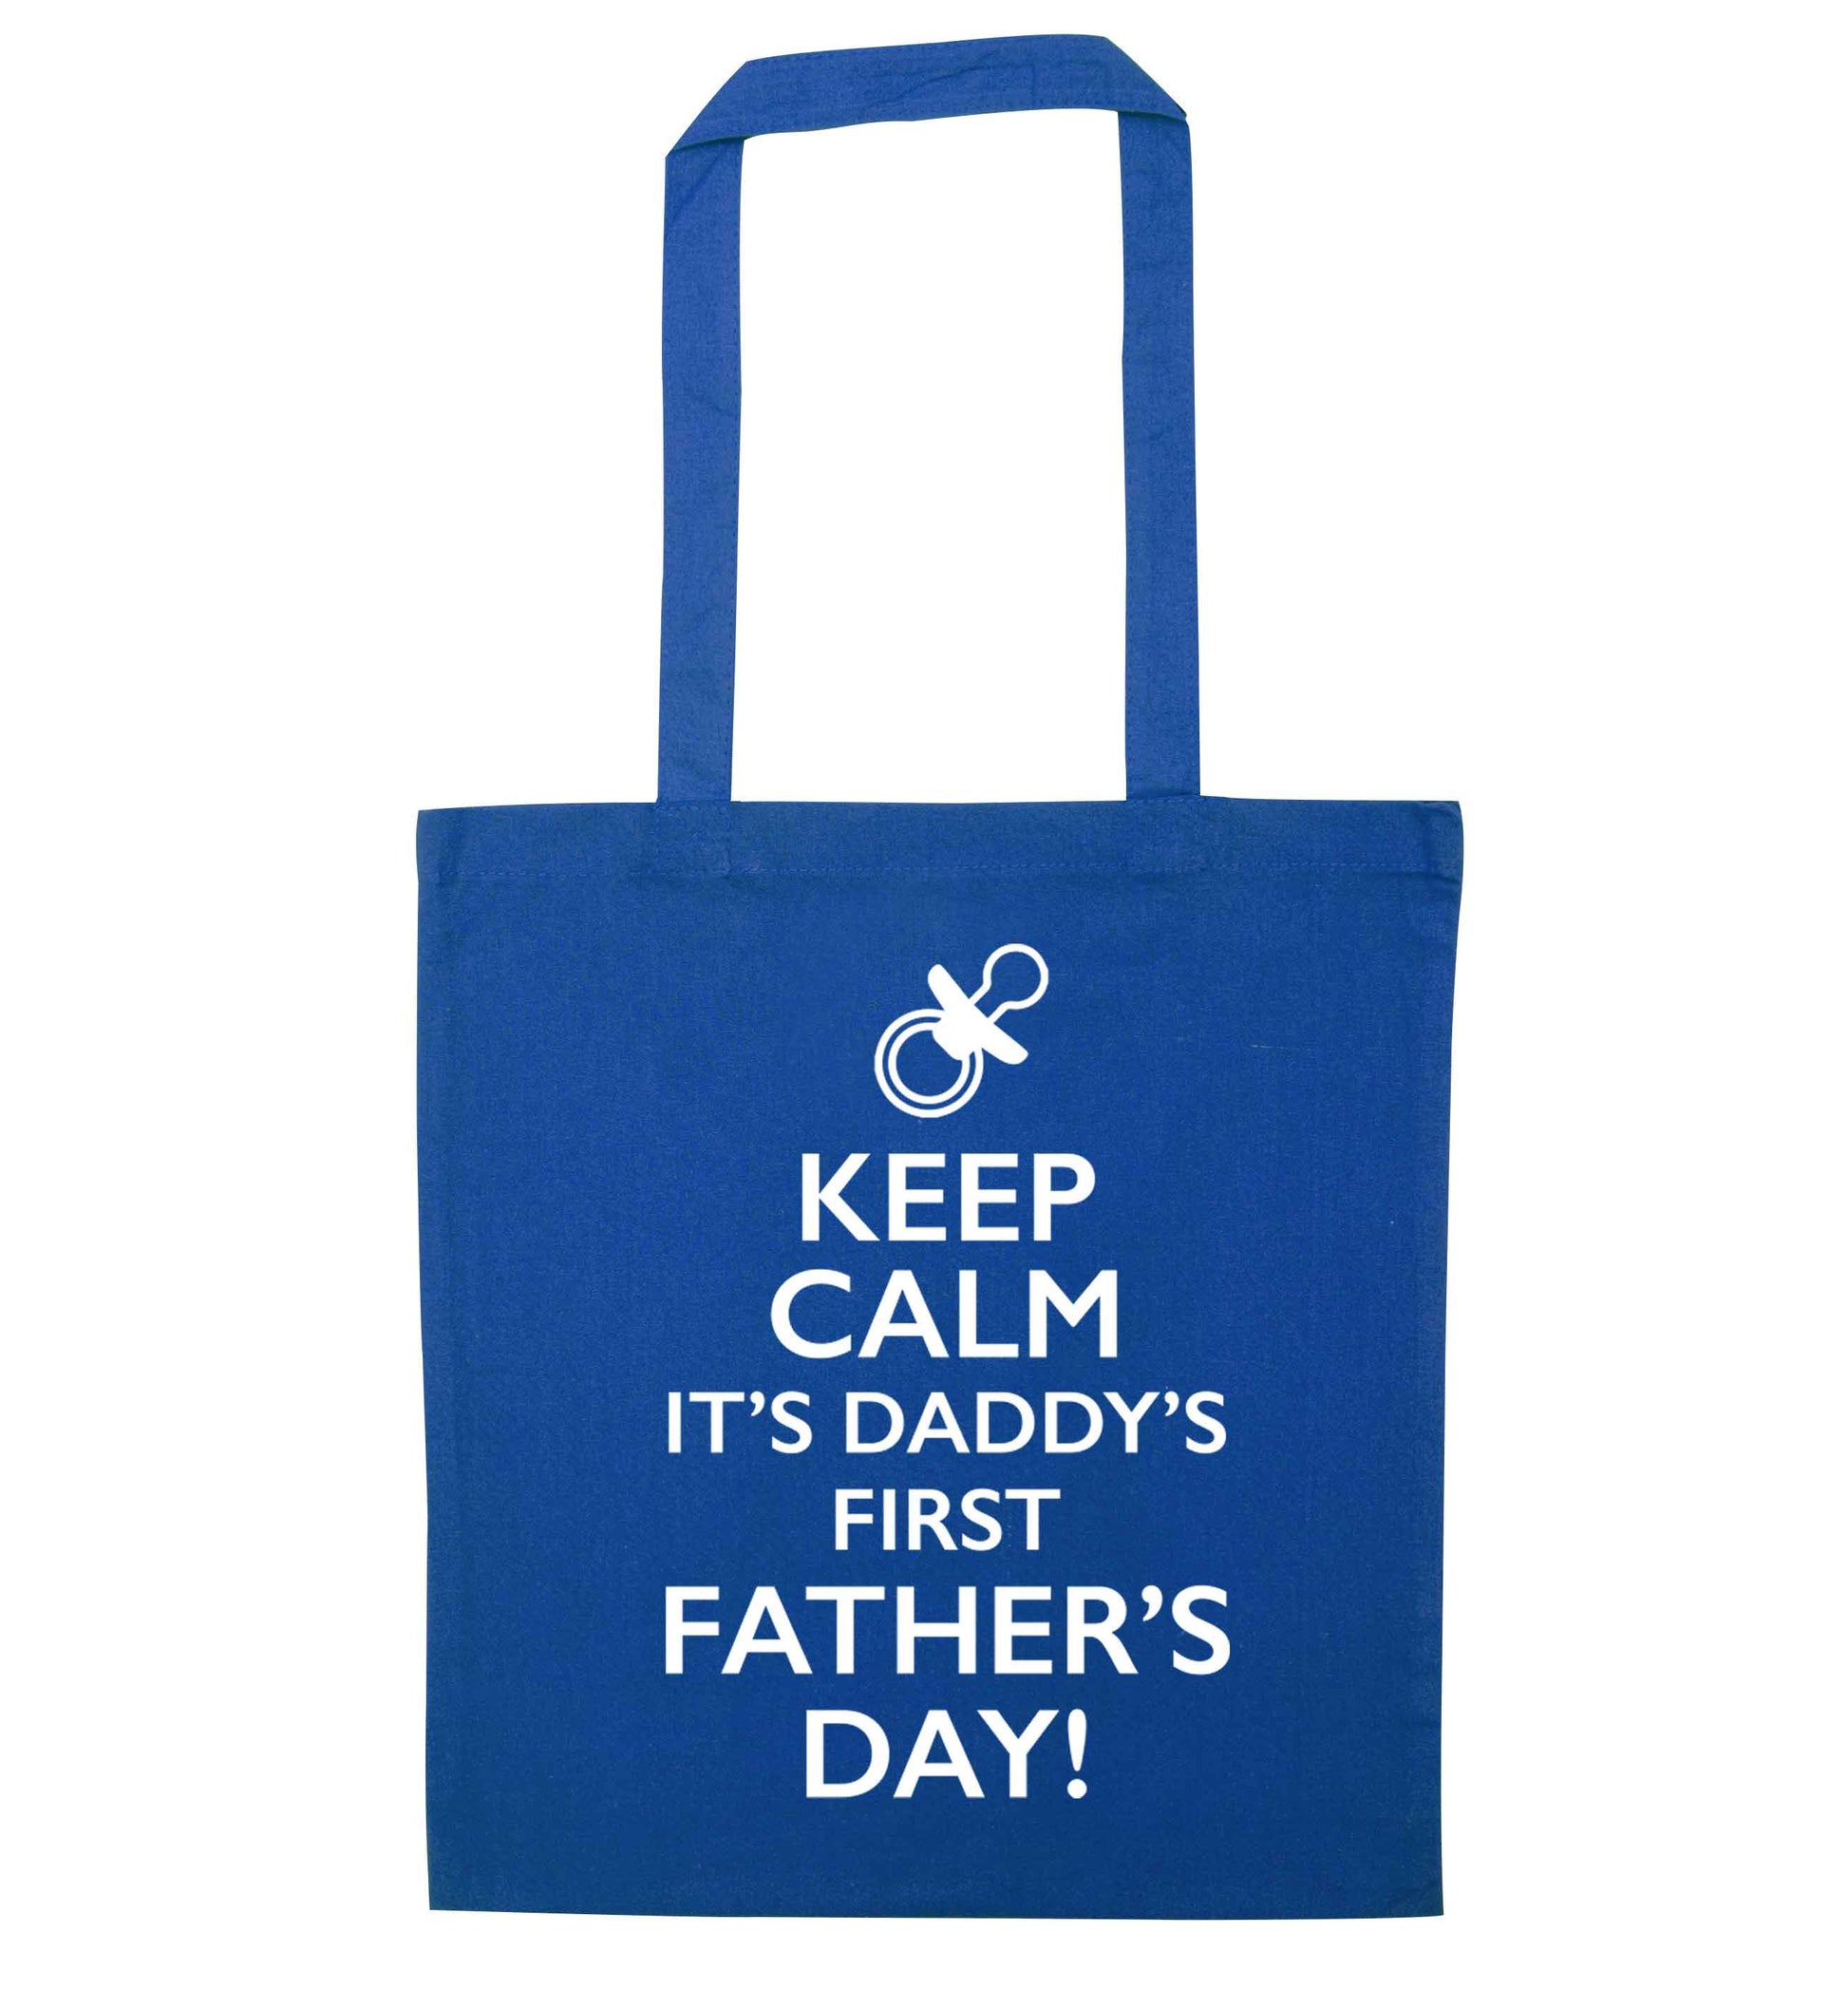 Keep calm it's daddys first father's day blue tote bag